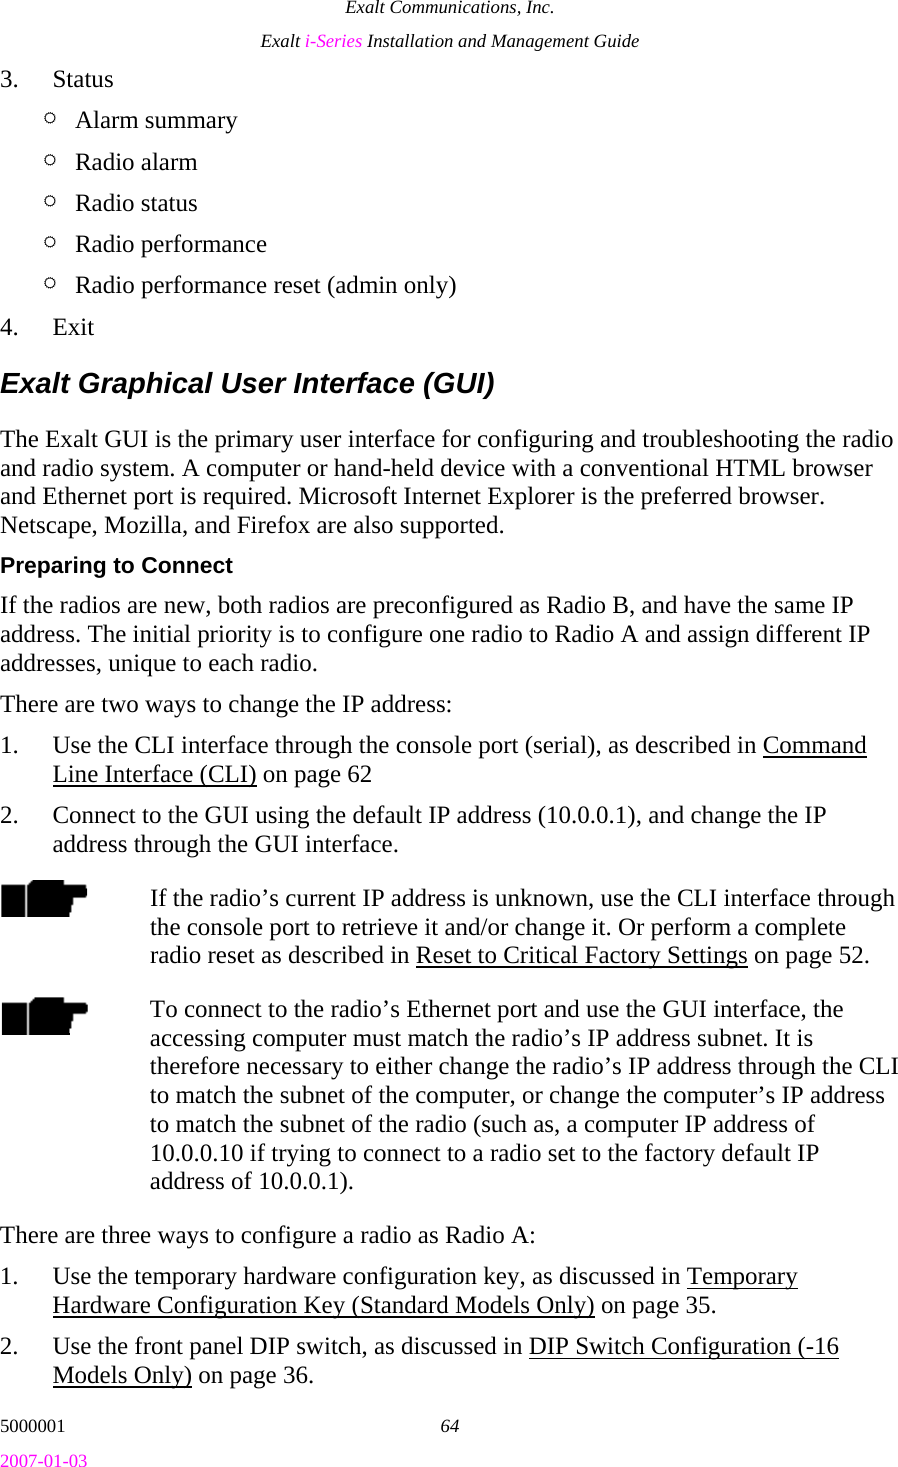 Exalt Communications, Inc. Exalt i-Series Installation and Management Guide 5000001  64 2007-01-03 3. Status ¶ Alarm summary ¶ Radio alarm ¶ Radio status ¶ Radio performance ¶ Radio performance reset (admin only) 4. Exit Exalt Graphical User Interface (GUI) The Exalt GUI is the primary user interface for configuring and troubleshooting the radio and radio system. A computer or hand-held device with a conventional HTML browser and Ethernet port is required. Microsoft Internet Explorer is the preferred browser. Netscape, Mozilla, and Firefox are also supported. Preparing to Connect If the radios are new, both radios are preconfigured as Radio B, and have the same IP address. The initial priority is to configure one radio to Radio A and assign different IP addresses, unique to each radio.  There are two ways to change the IP address: 1. Use the CLI interface through the console port (serial), as described in Command Line Interface (CLI) on page 62 2. Connect to the GUI using the default IP address (10.0.0.1), and change the IP address through the GUI interface. If the radio’s current IP address is unknown, use the CLI interface through the console port to retrieve it and/or change it. Or perform a complete radio reset as described in Reset to Critical Factory Settings on page 52. To connect to the radio’s Ethernet port and use the GUI interface, the accessing computer must match the radio’s IP address subnet. It is therefore necessary to either change the radio’s IP address through the CLI to match the subnet of the computer, or change the computer’s IP address to match the subnet of the radio (such as, a computer IP address of 10.0.0.10 if trying to connect to a radio set to the factory default IP address of 10.0.0.1). There are three ways to configure a radio as Radio A: 1. Use the temporary hardware configuration key, as discussed in Temporary Hardware Configuration Key (Standard Models Only) on page 35. 2. Use the front panel DIP switch, as discussed in DIP Switch Configuration (-16 Models Only) on page 36. 